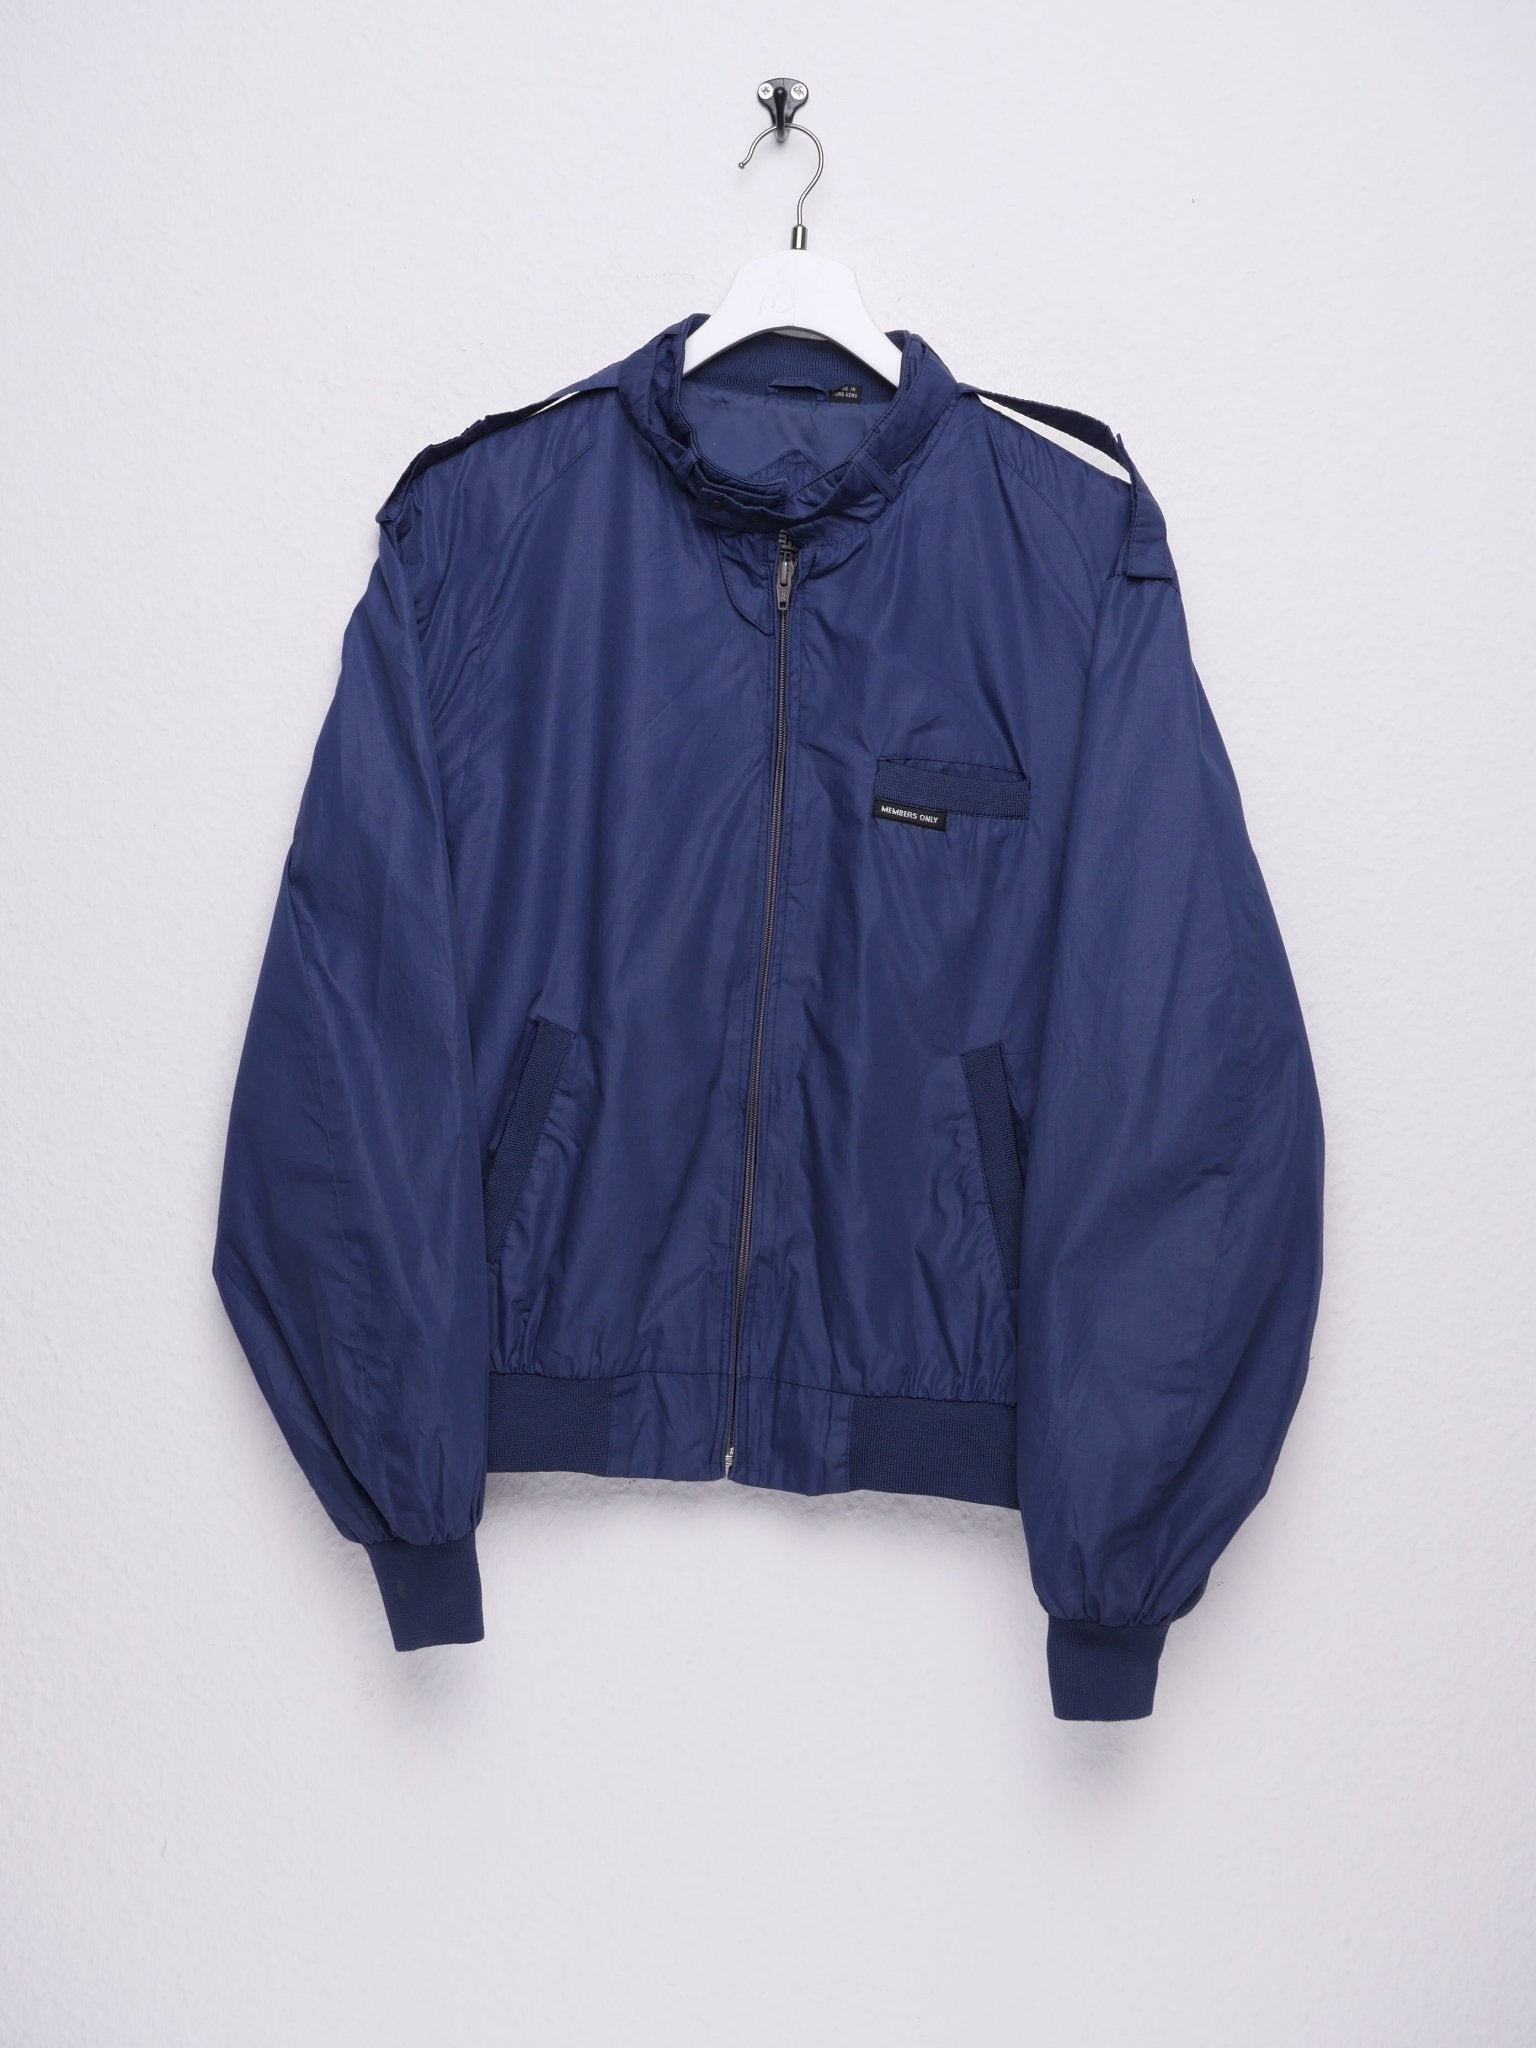 Members Only embroidered Patch navy Jacket - Peeces